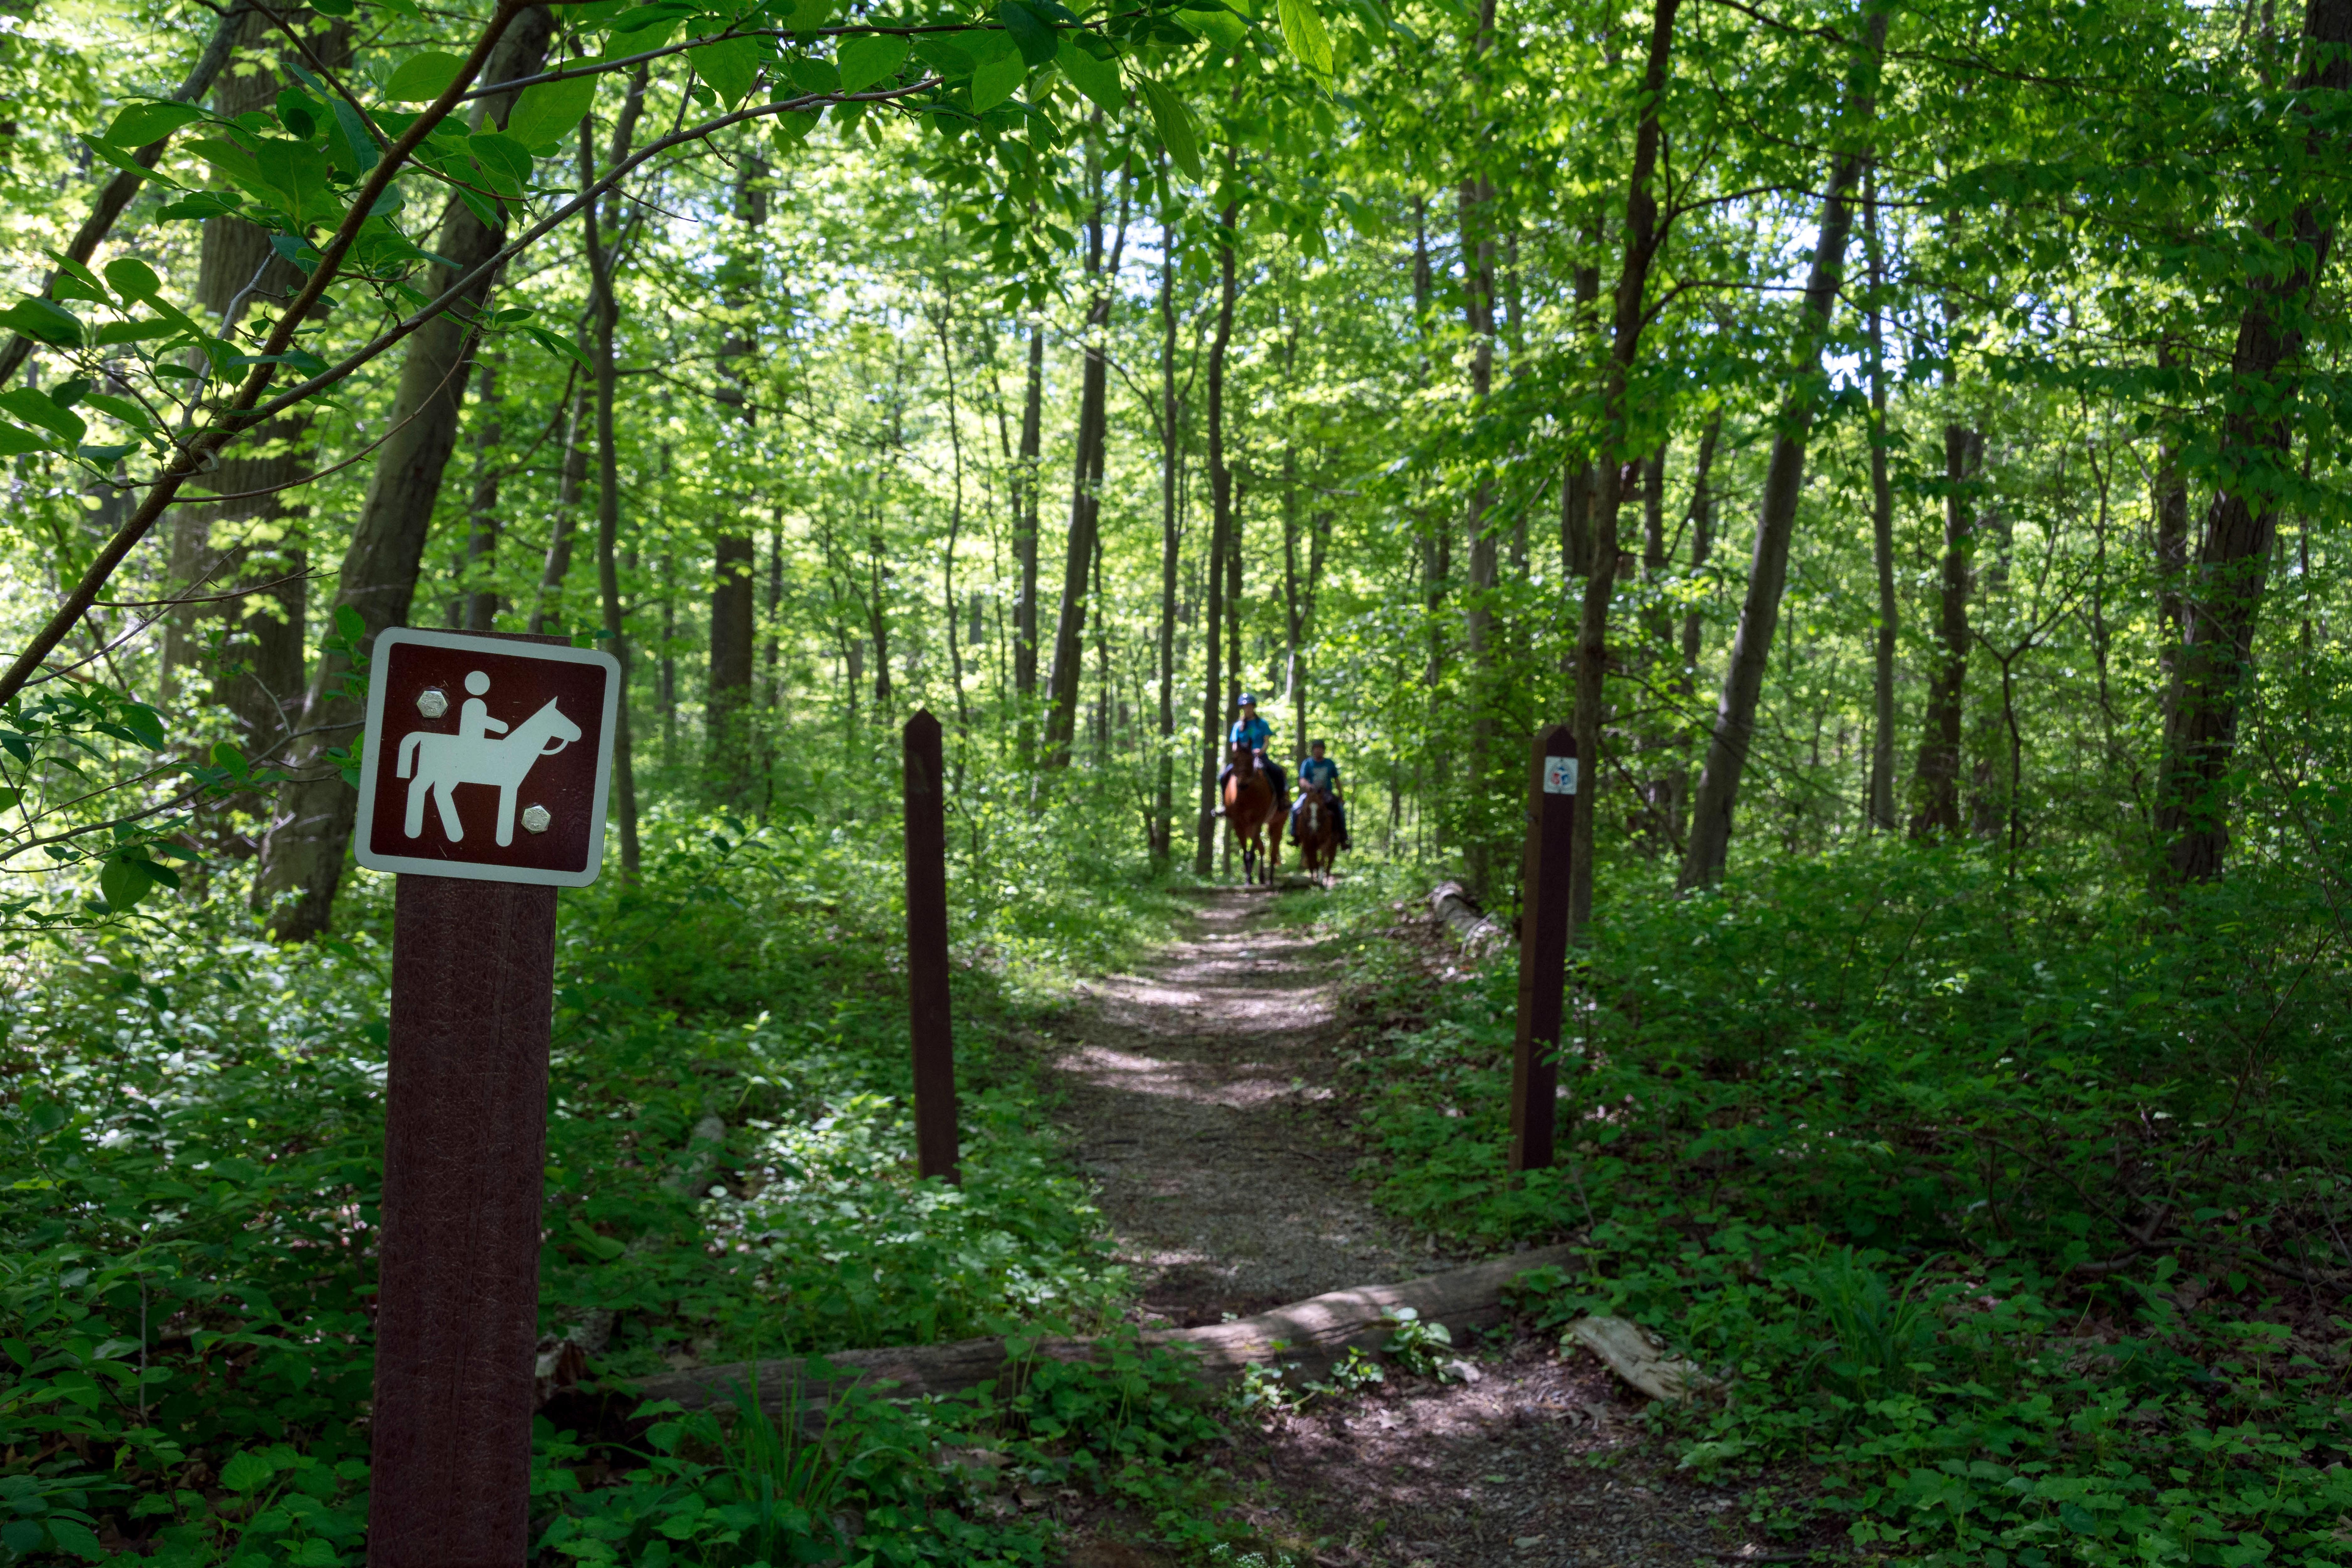 Two riders, on horseback, walking through a forested trail.